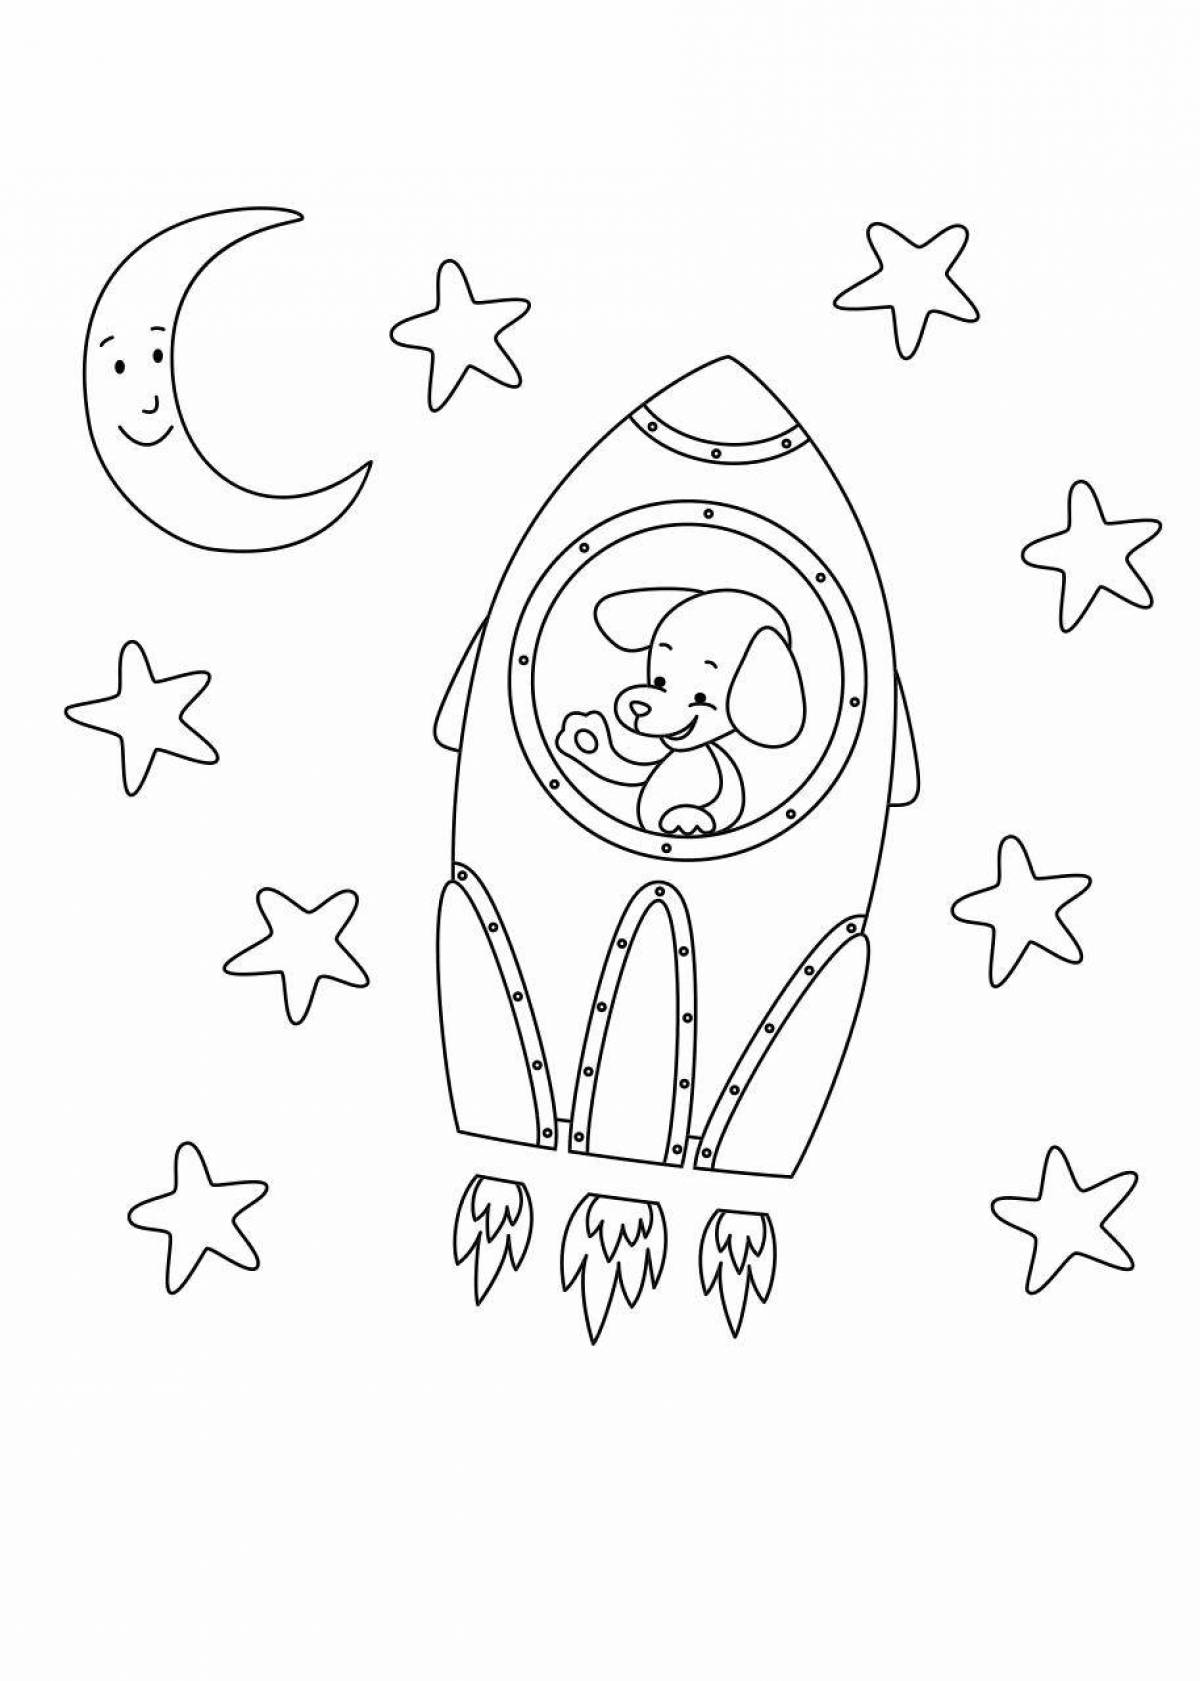 Furry coloring pages animals in orbit